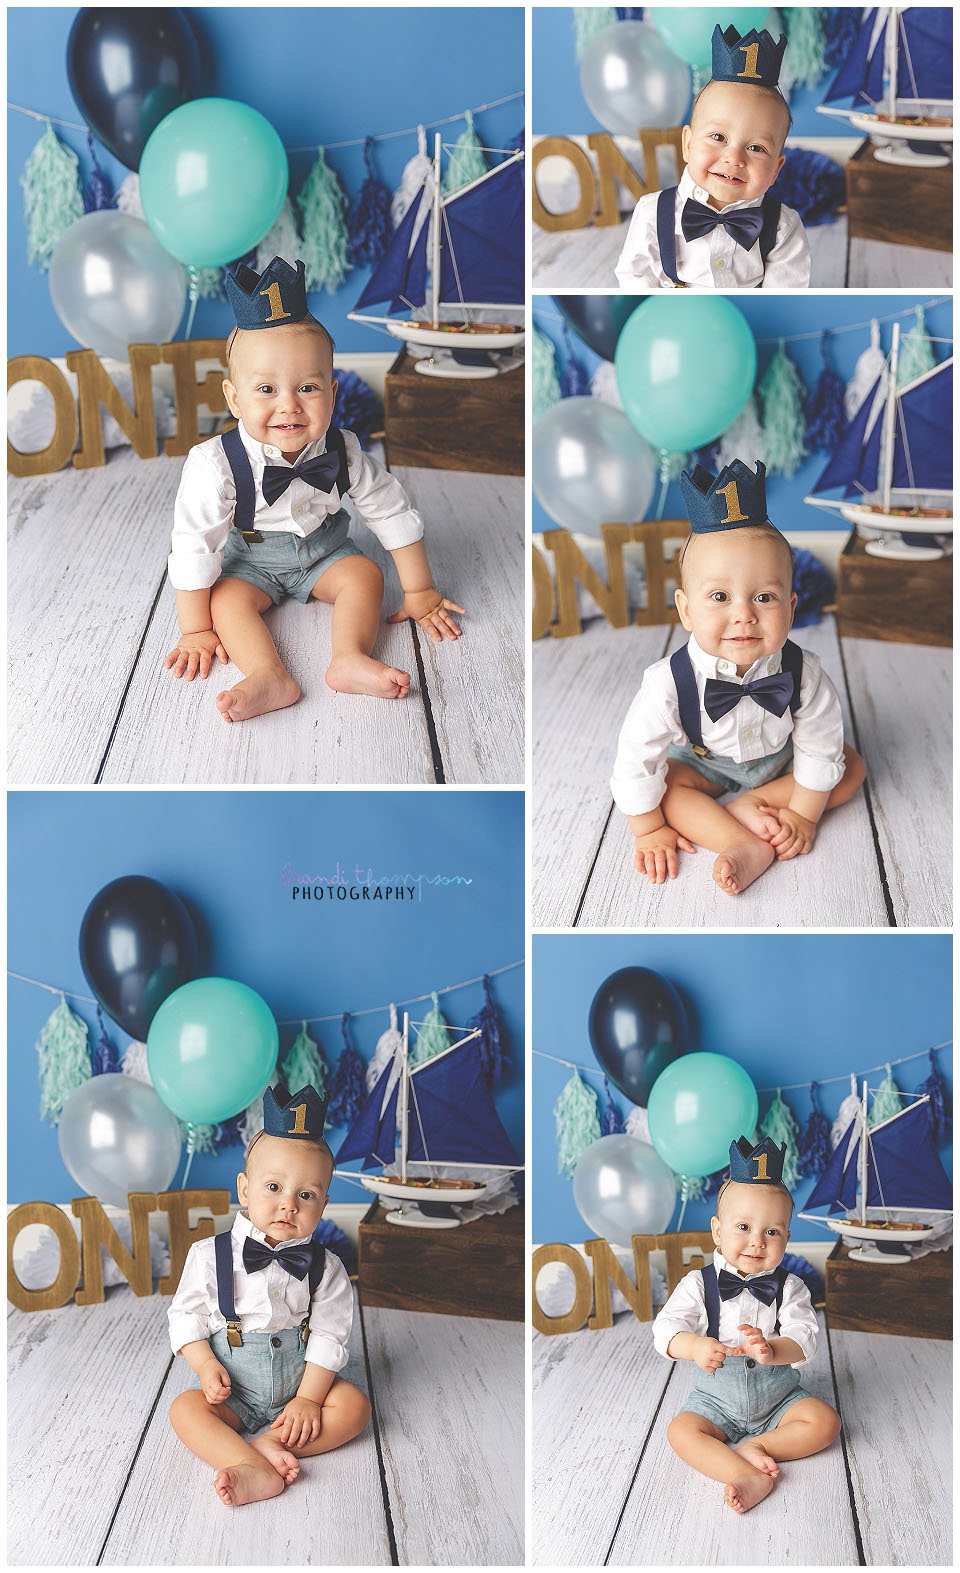 nautical themed cake smash with baby boy in plano, tx photography studio